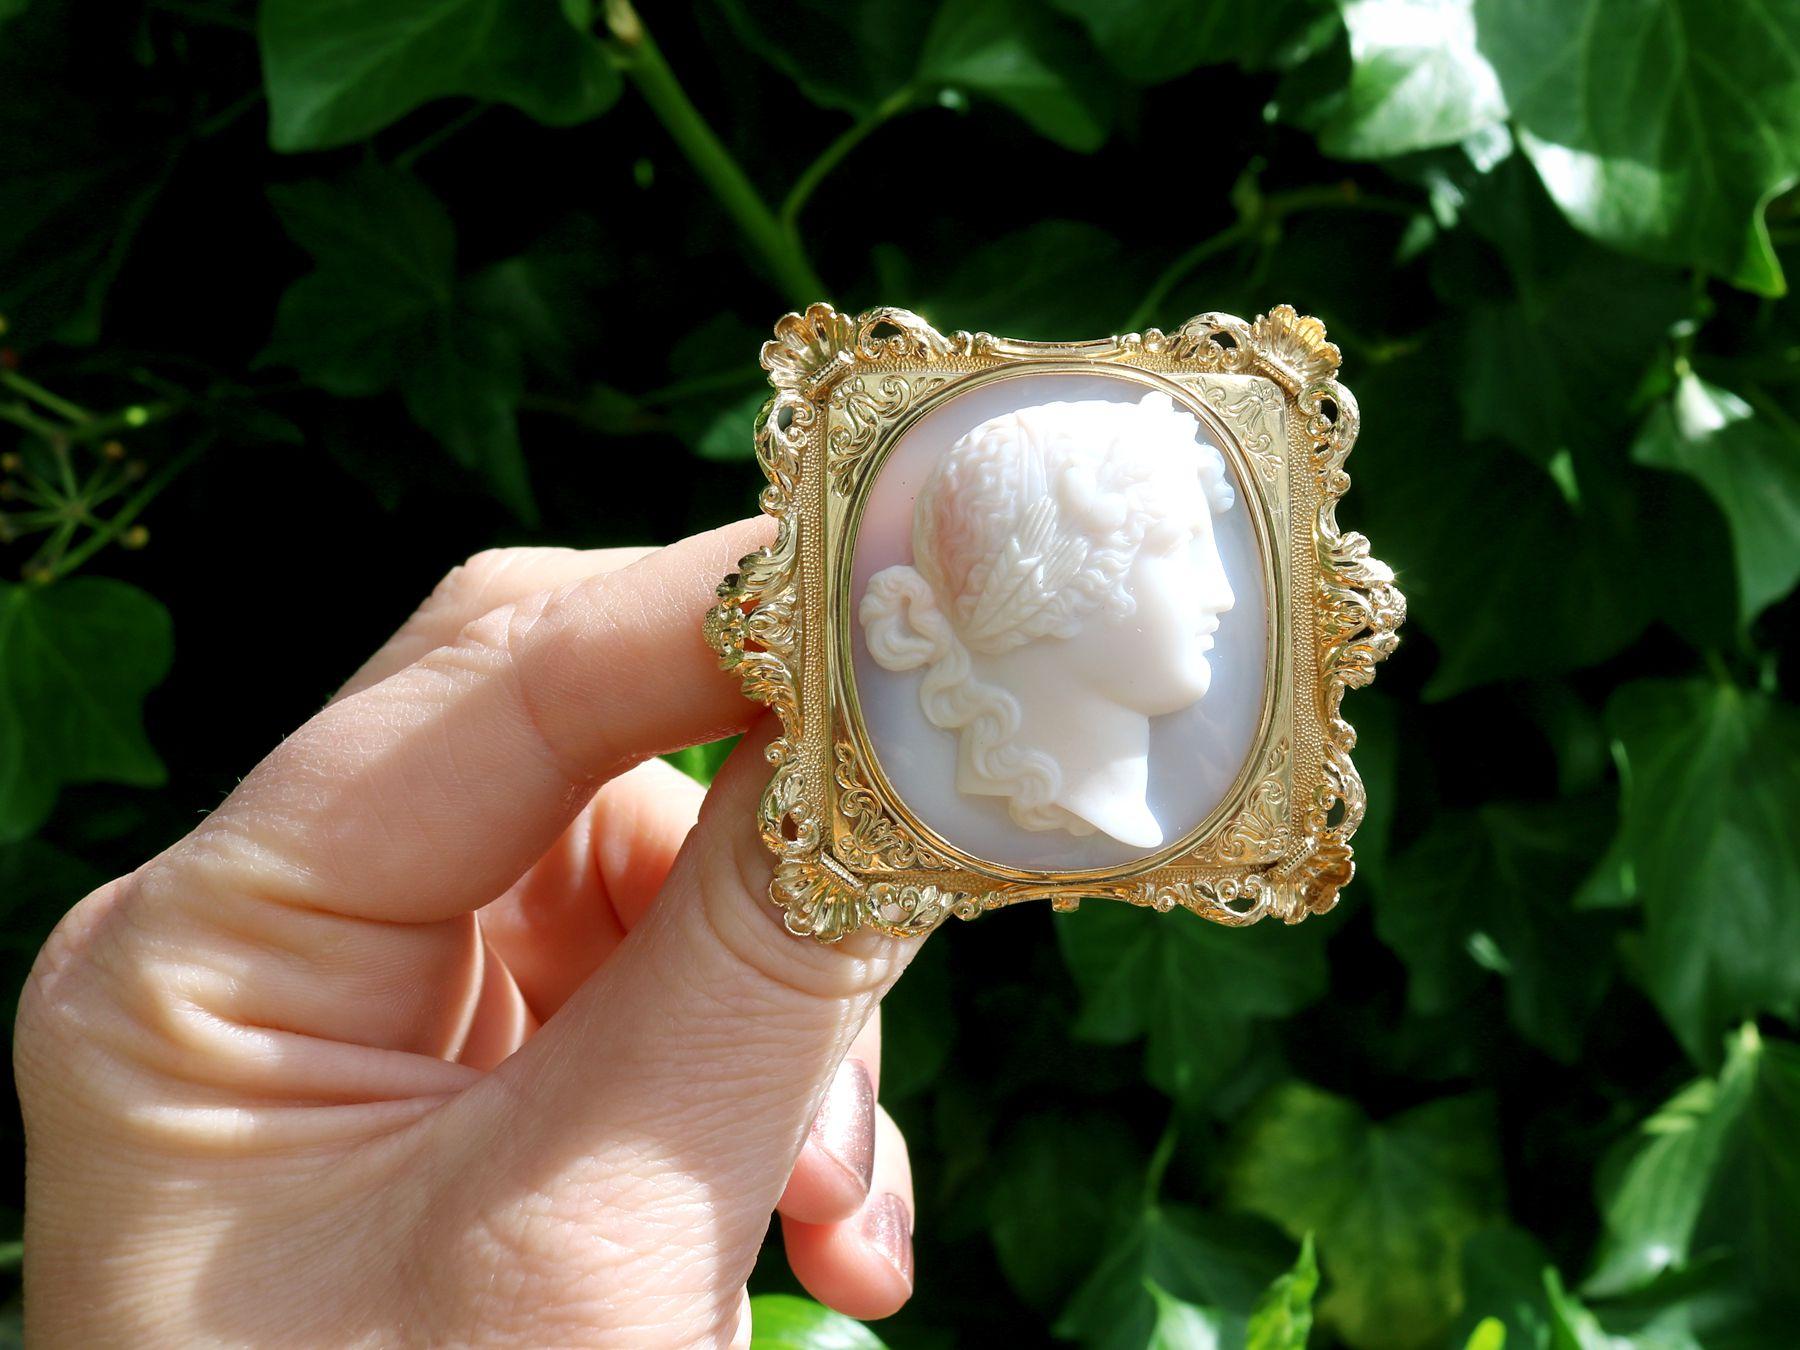 A stunning, fine and impressive Victorian 18 karat yellow gold, carved hardstone cameo brooch; part of our diverse antique jewelry and estate jewelry collections.

This stunning, fine and impressive Victorian brooch has been crafted in 18k yellow